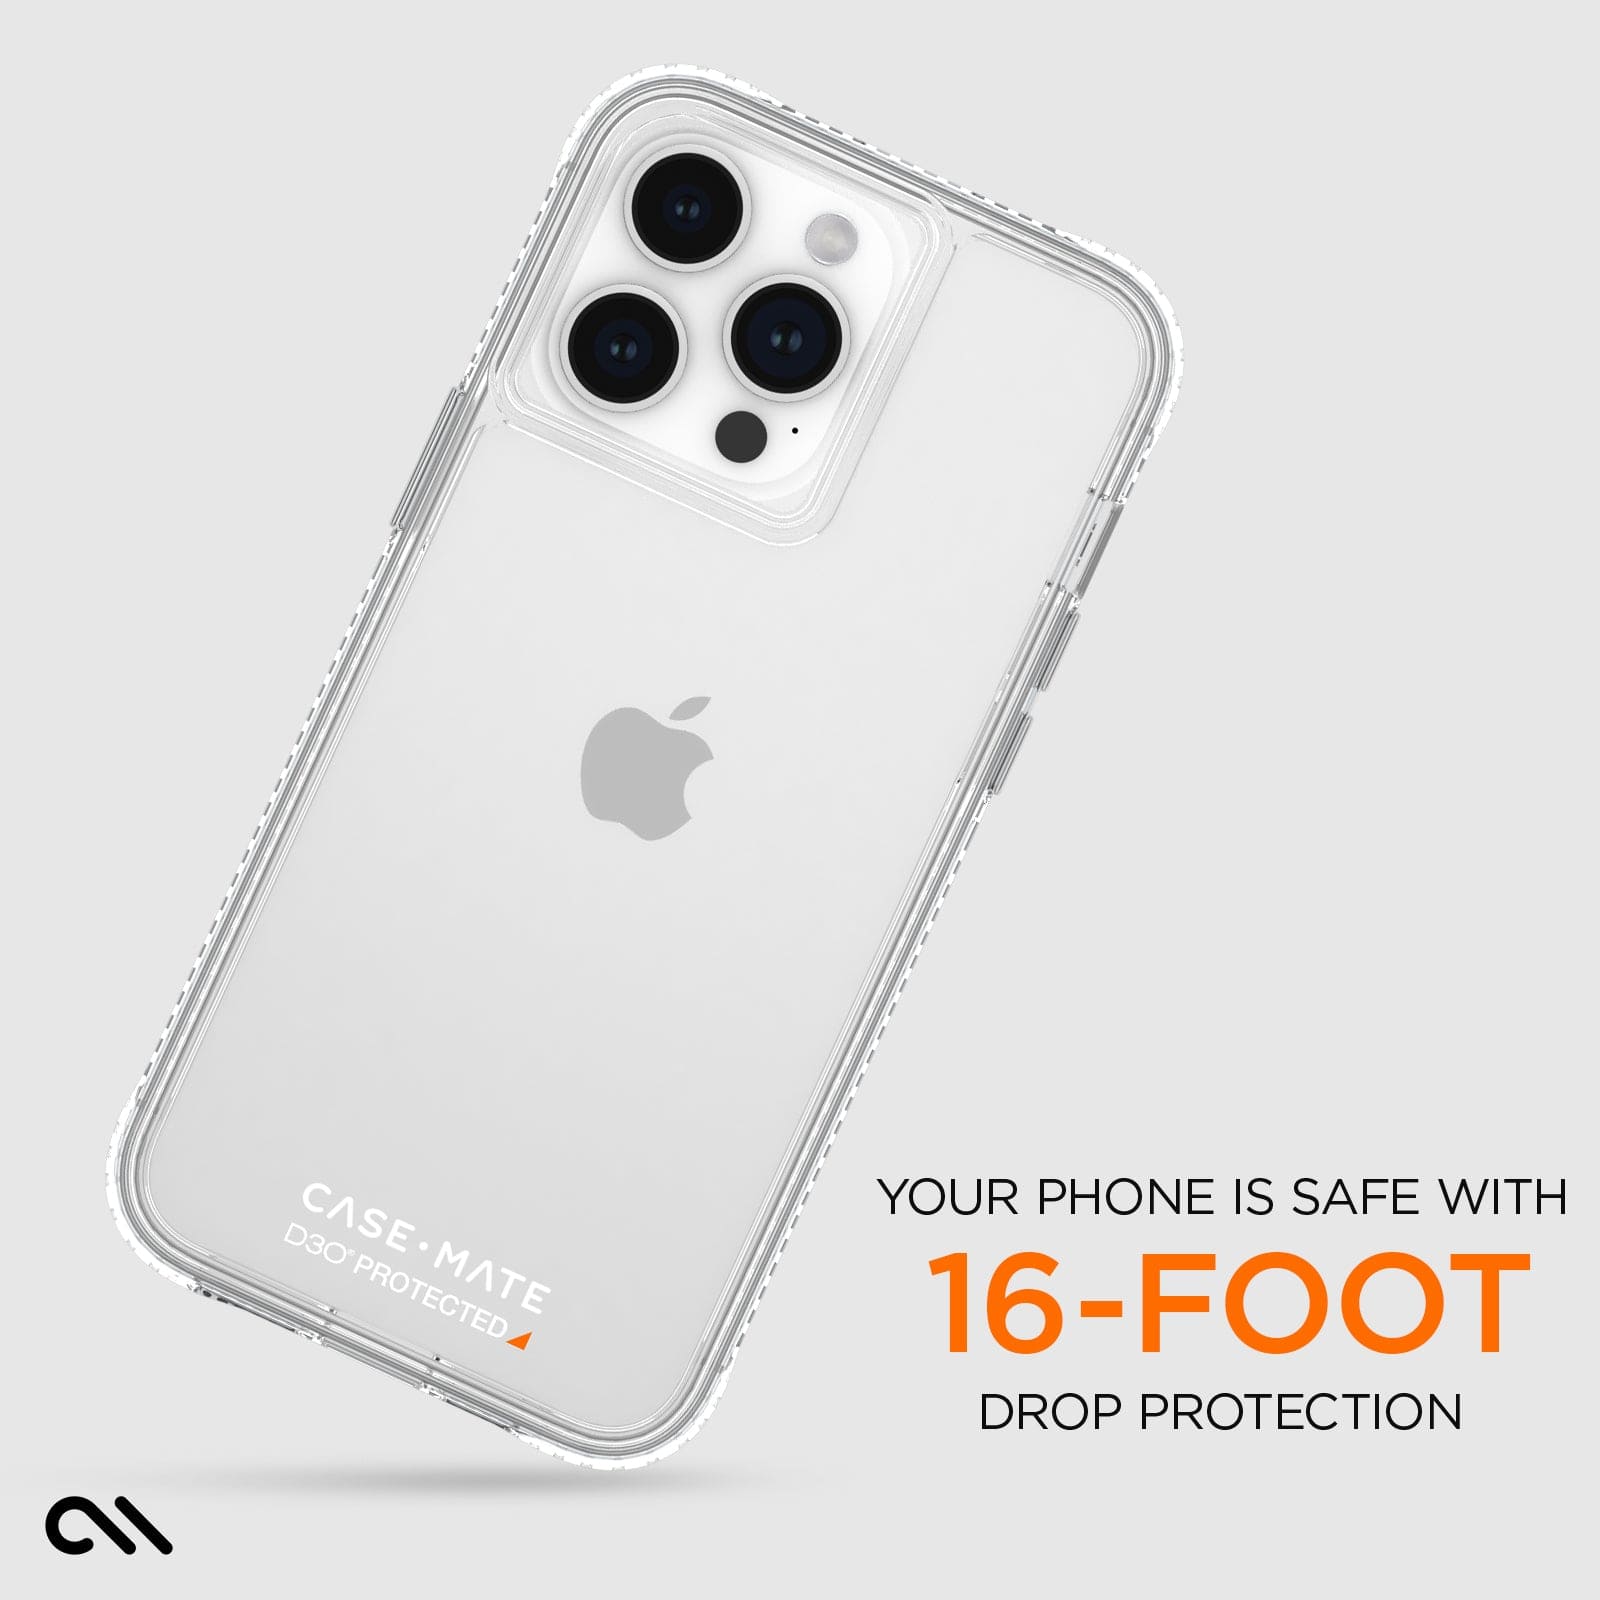 YOUR PHONE IS SAFE WITH 16FOOT DROP PROTECTION